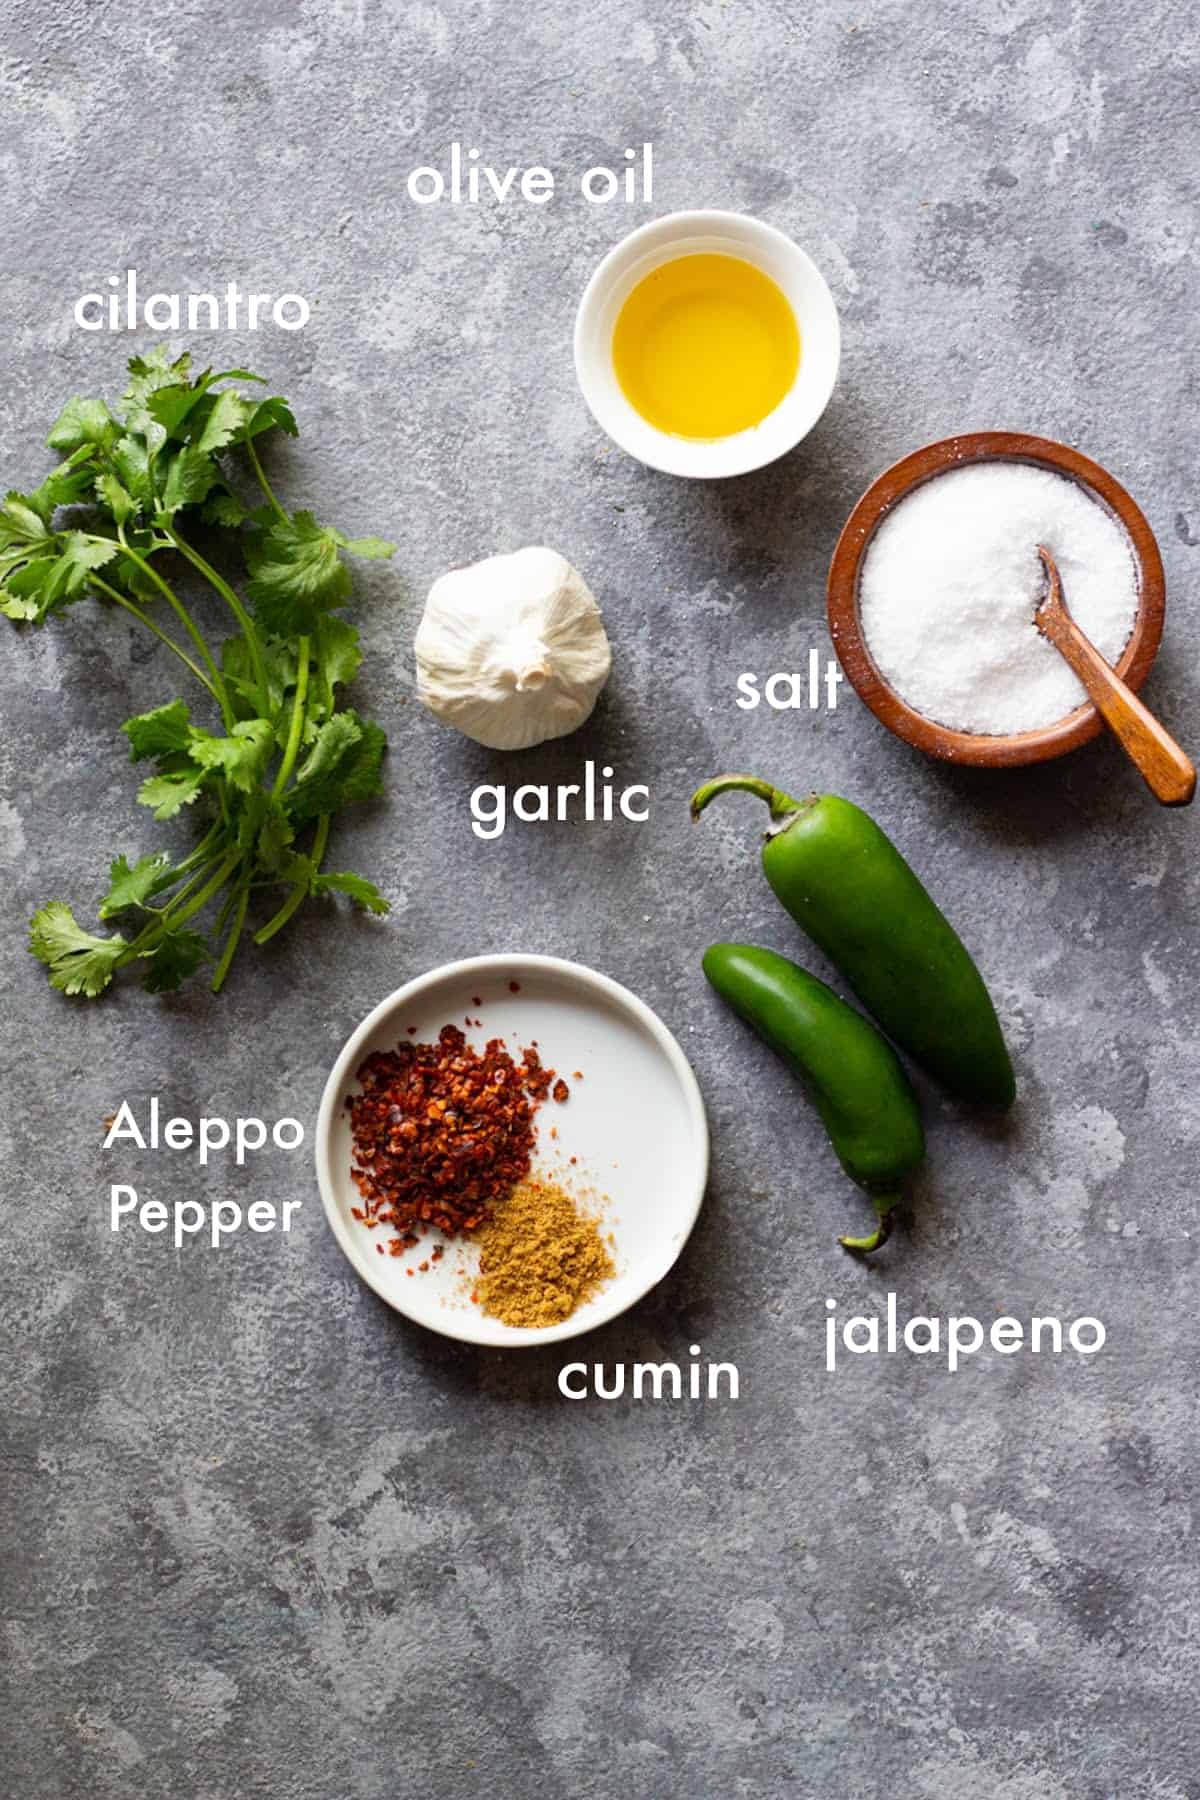 To make zhoug you need cilantro, jalapeno, garlic, olive oil, spices and salt.